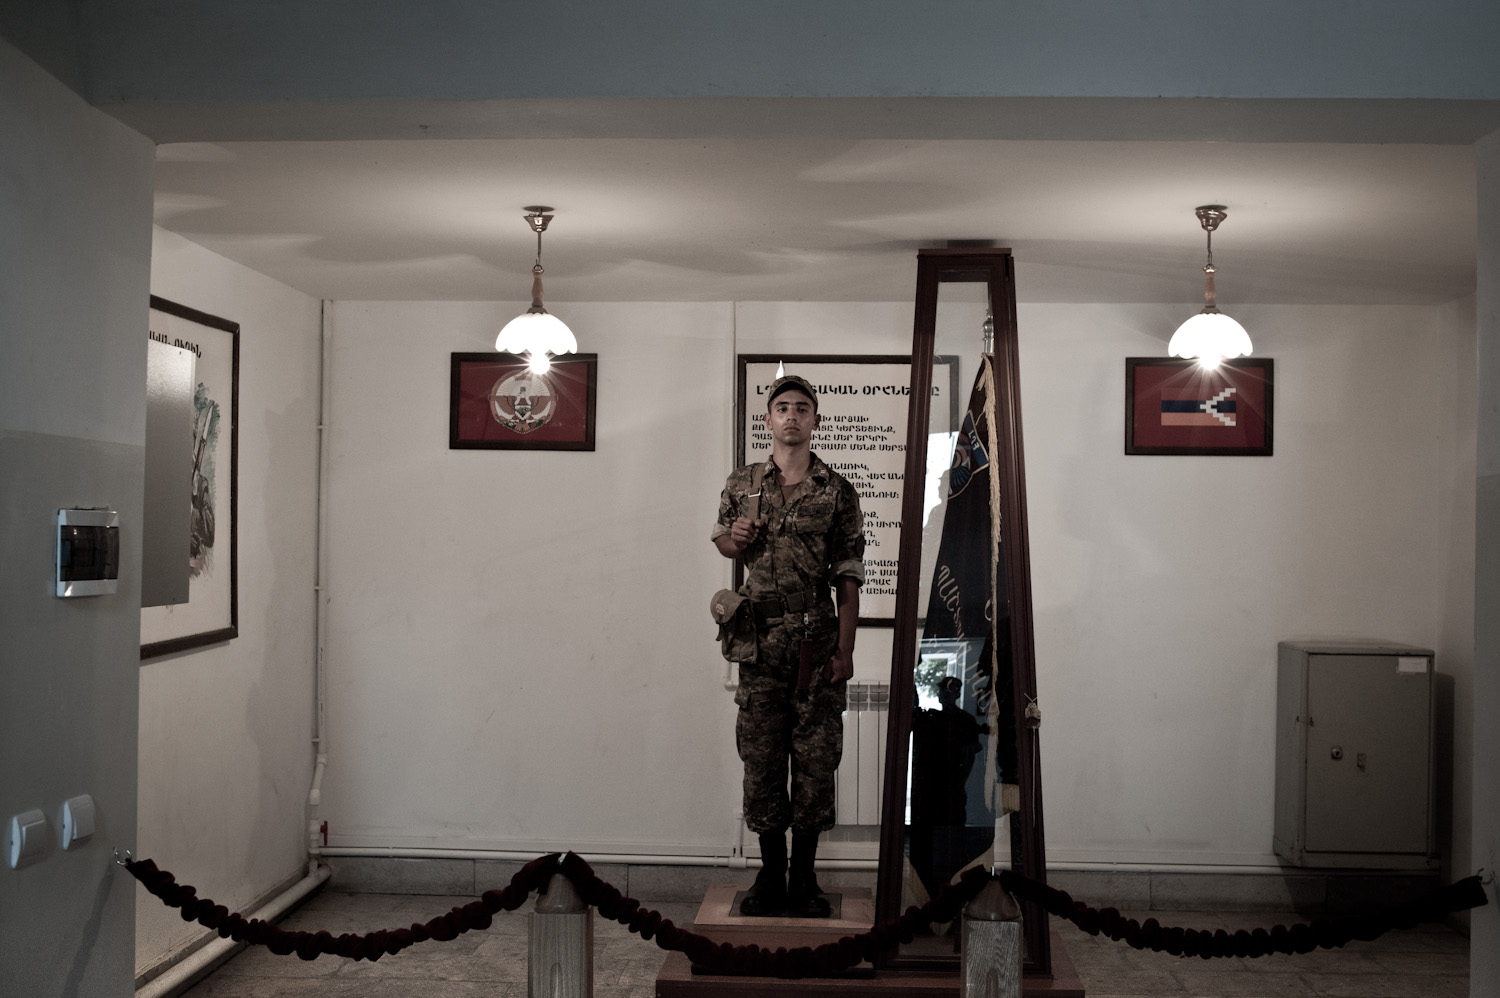  In two-hour shifts, a statuesque "honorary soldier" guards the flag of the Mataghis military unit at headquarters near Martakert, Nagorno-Karabakh.  